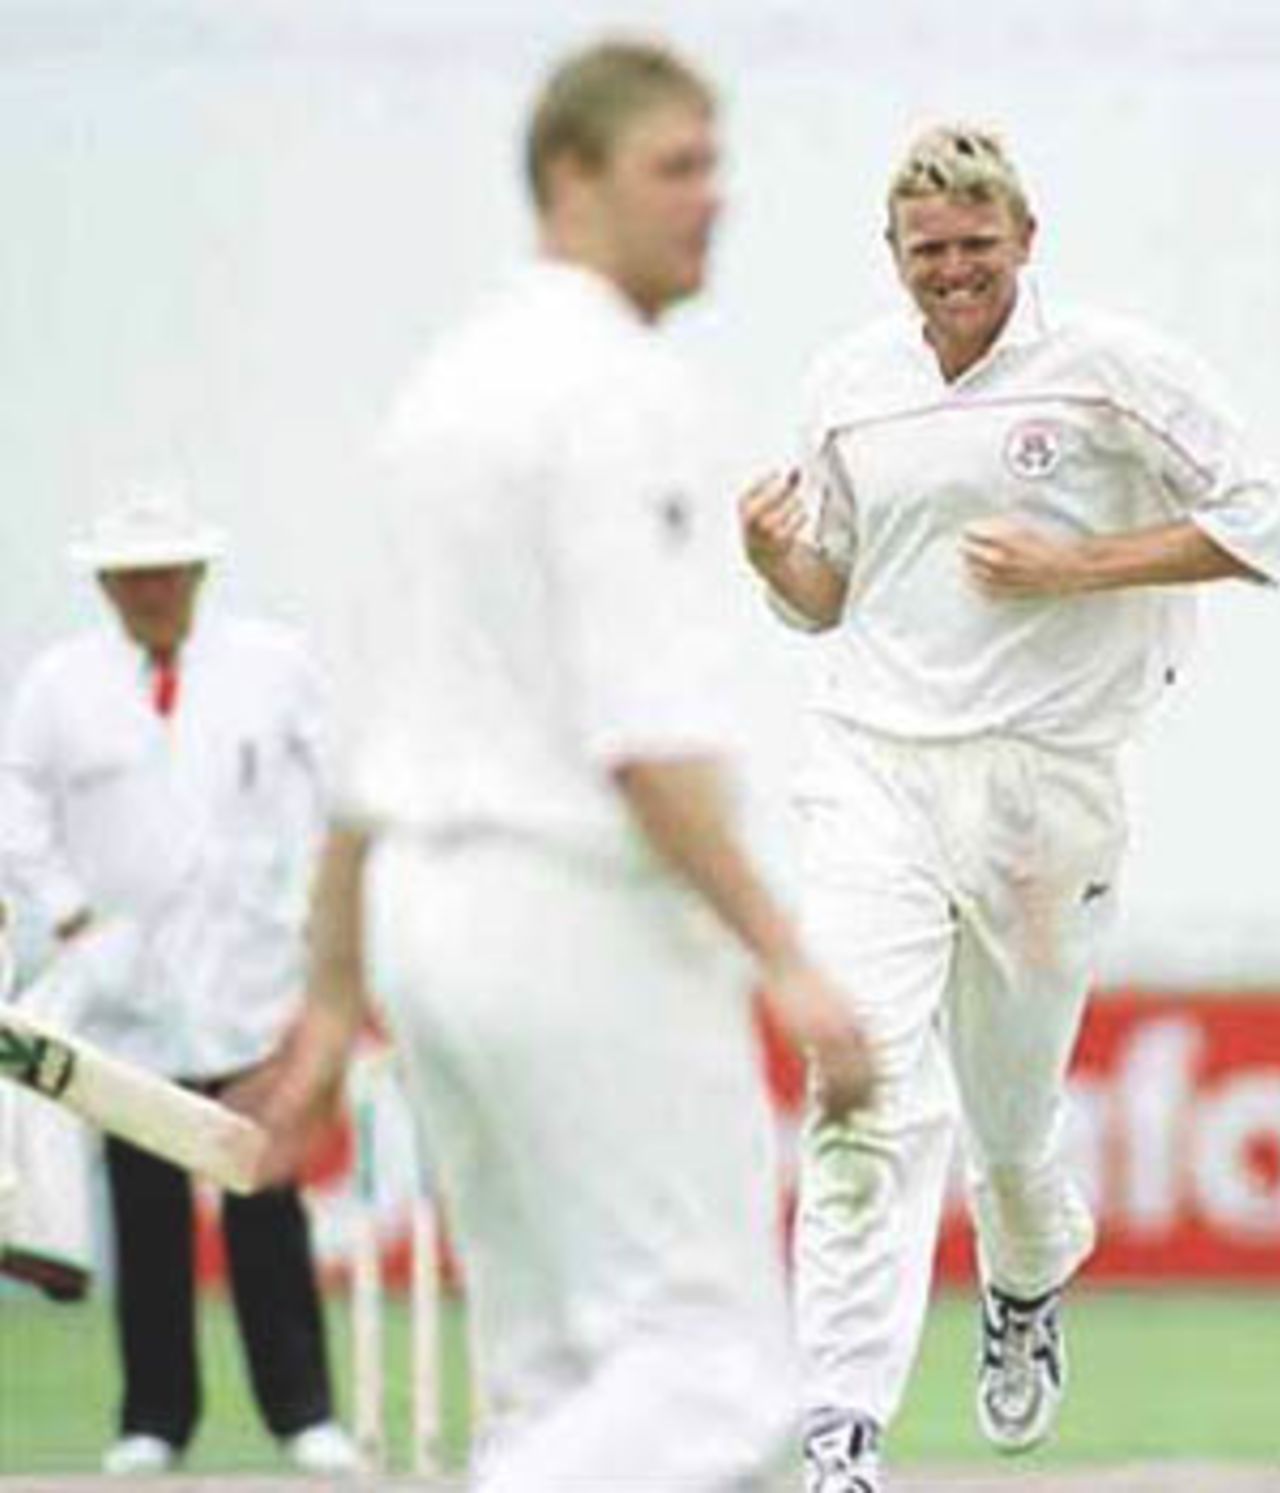 Peter Martin celebrates after capturing the wicket of Matthew Walker, PPP healthcare County Championship Division One, 2000, Lancashire v Kent, Old Trafford, Manchester, 17-20 August 2000(Day 2).